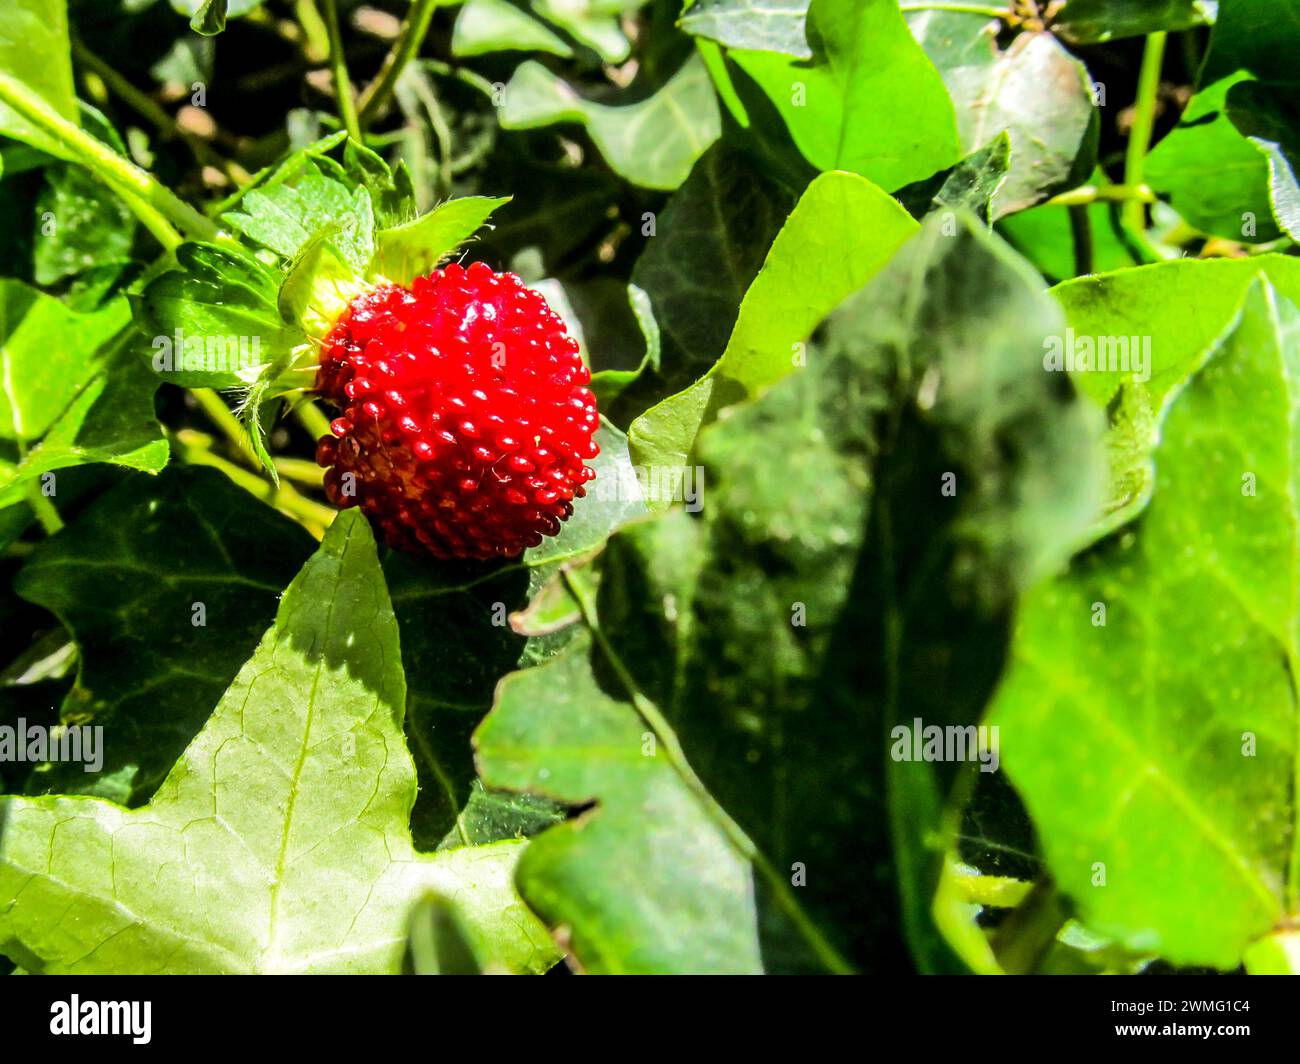 The scarlet fruit of a mock strawberry, Potentilla Indica, surrounded by the foliage of other plants in a woodland garden Stock Photo